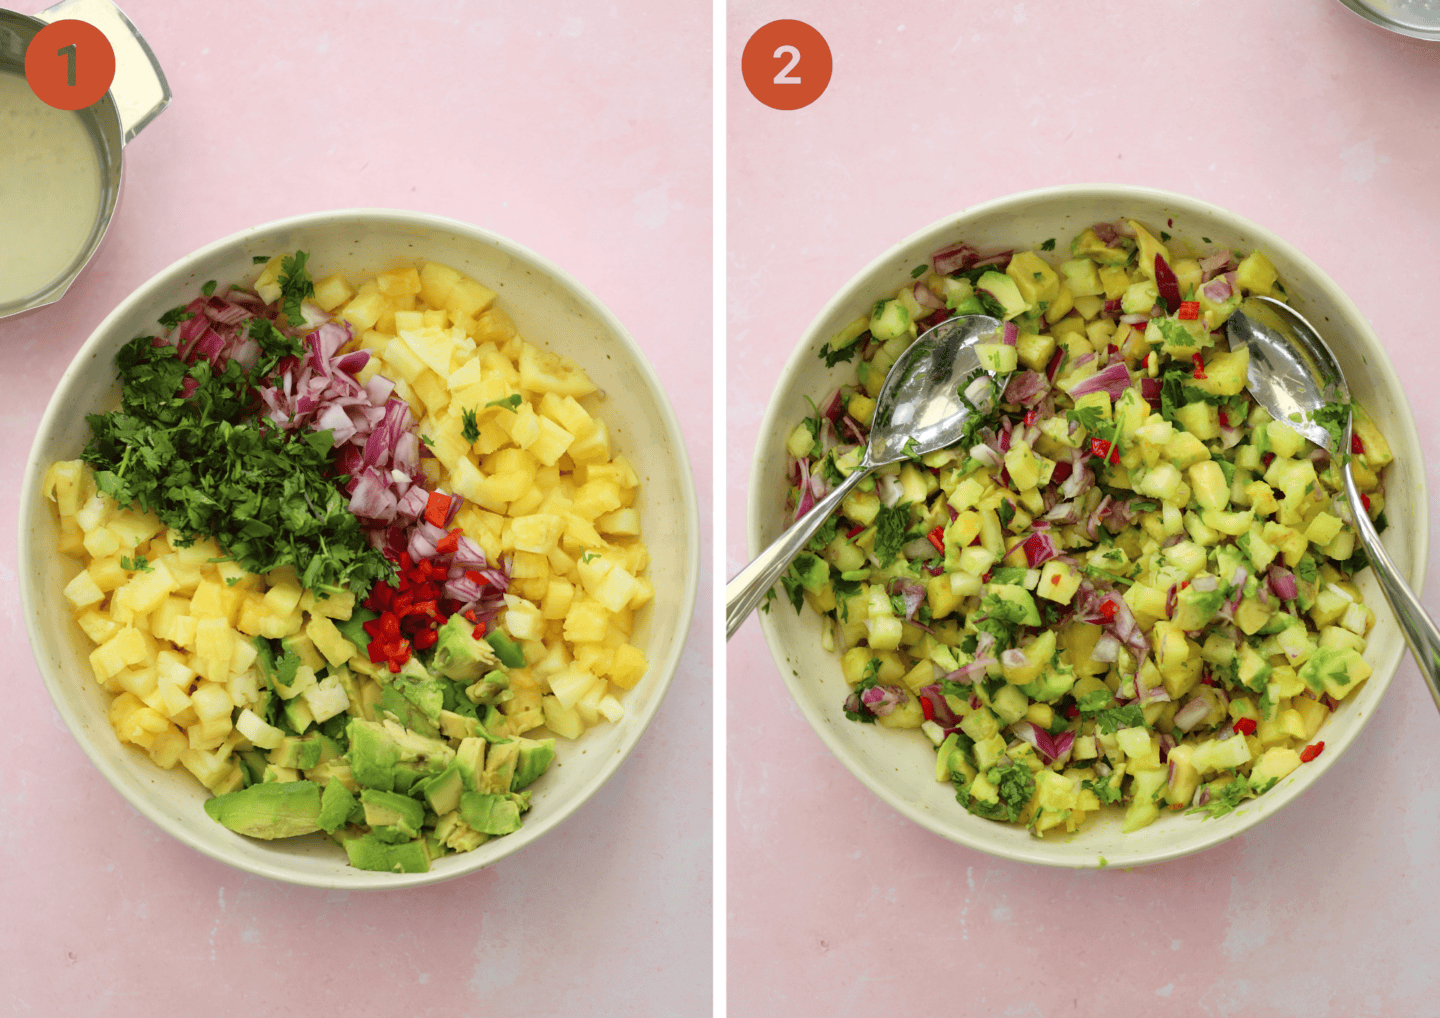 avocado and pineapple salsa ingredients and mix together in a bowl.